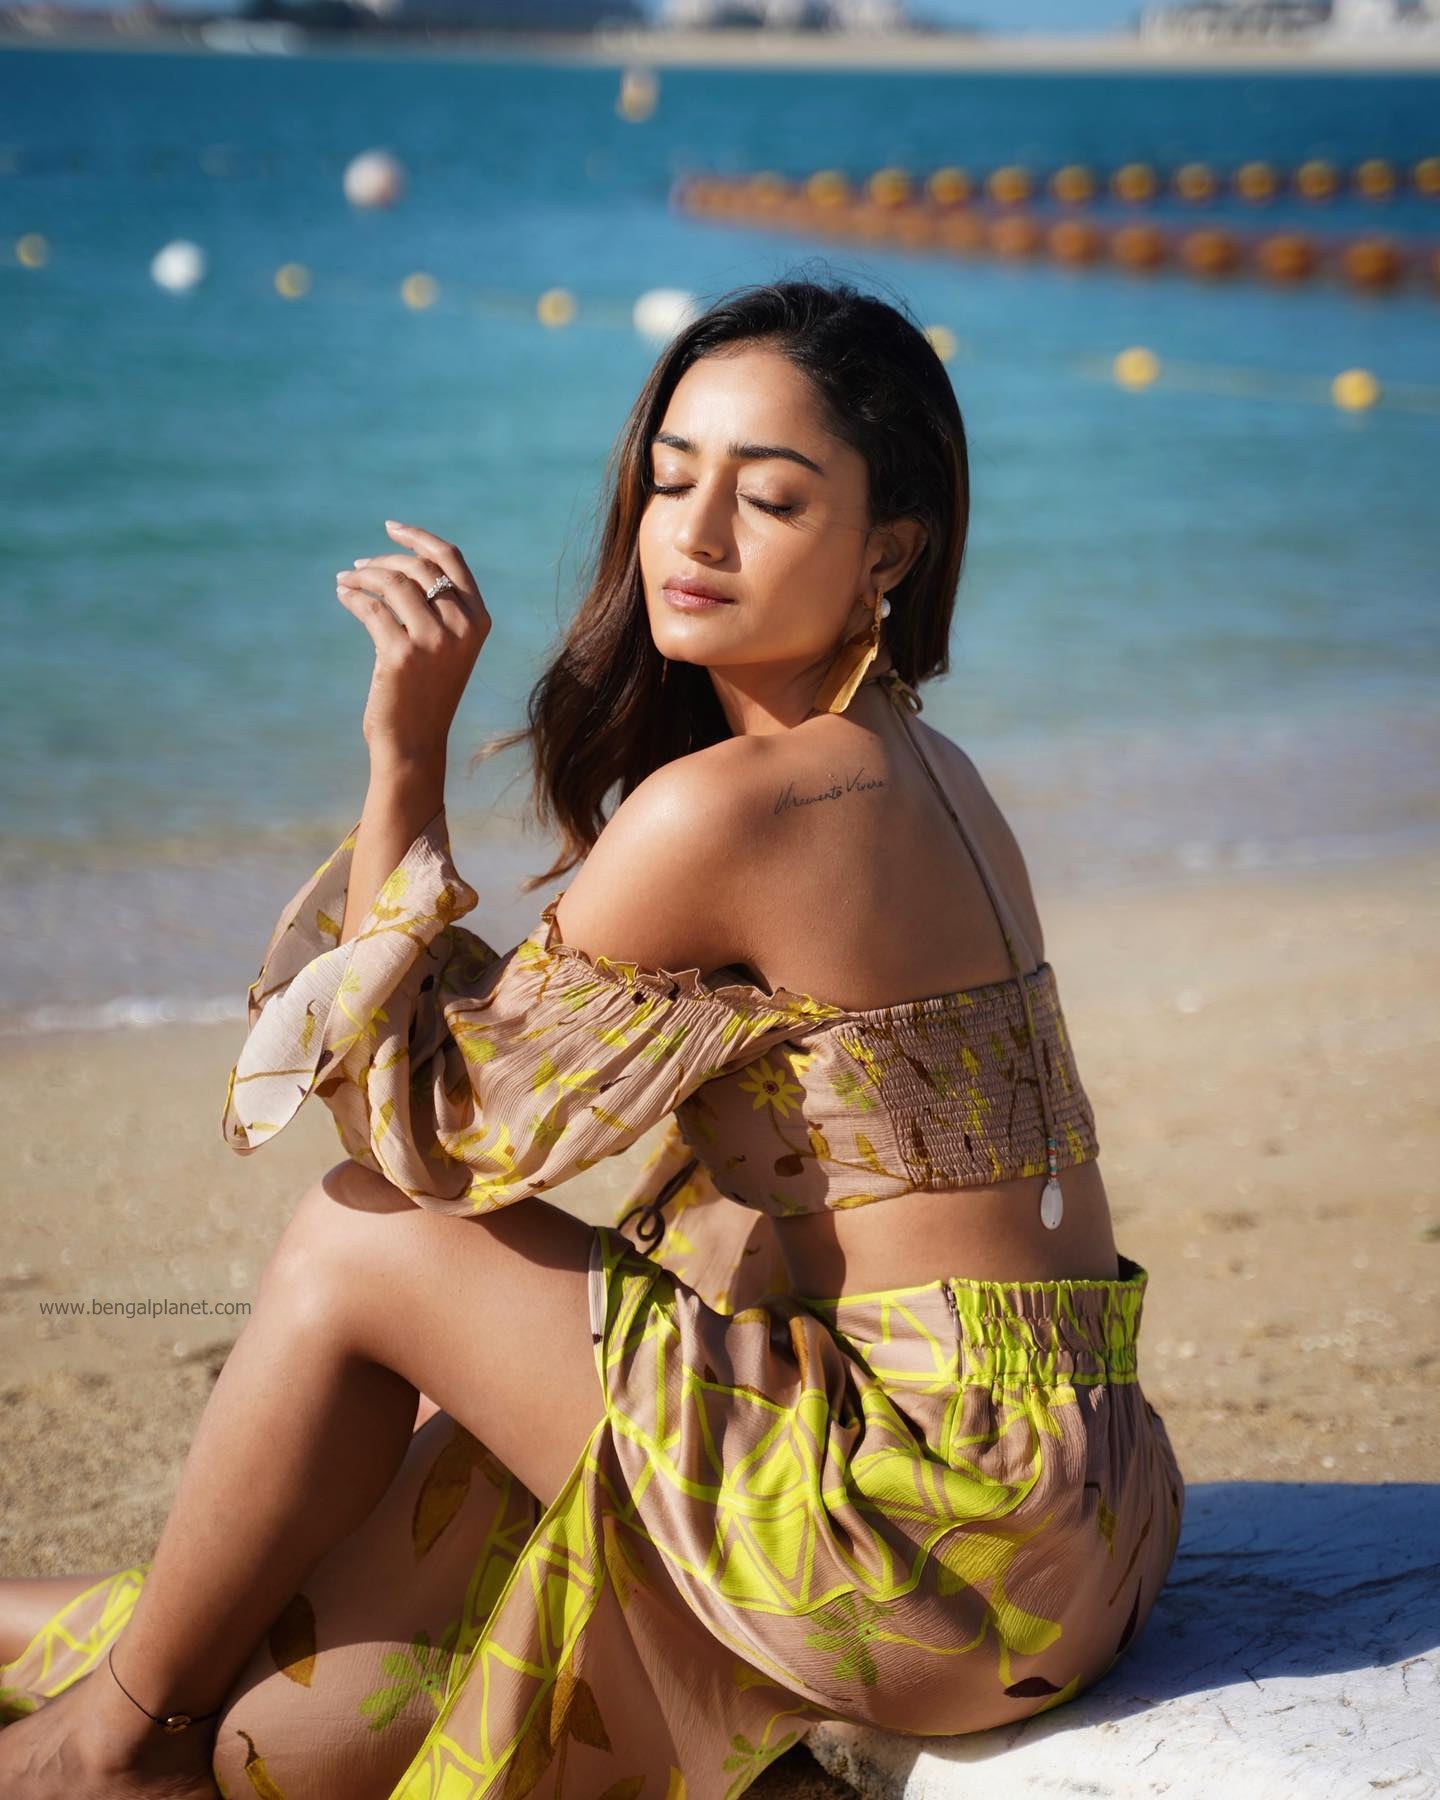 Tridha-Choudhury-looks-chic-hot-and-classy-in-these-pictures-27-Bengalplanet.com